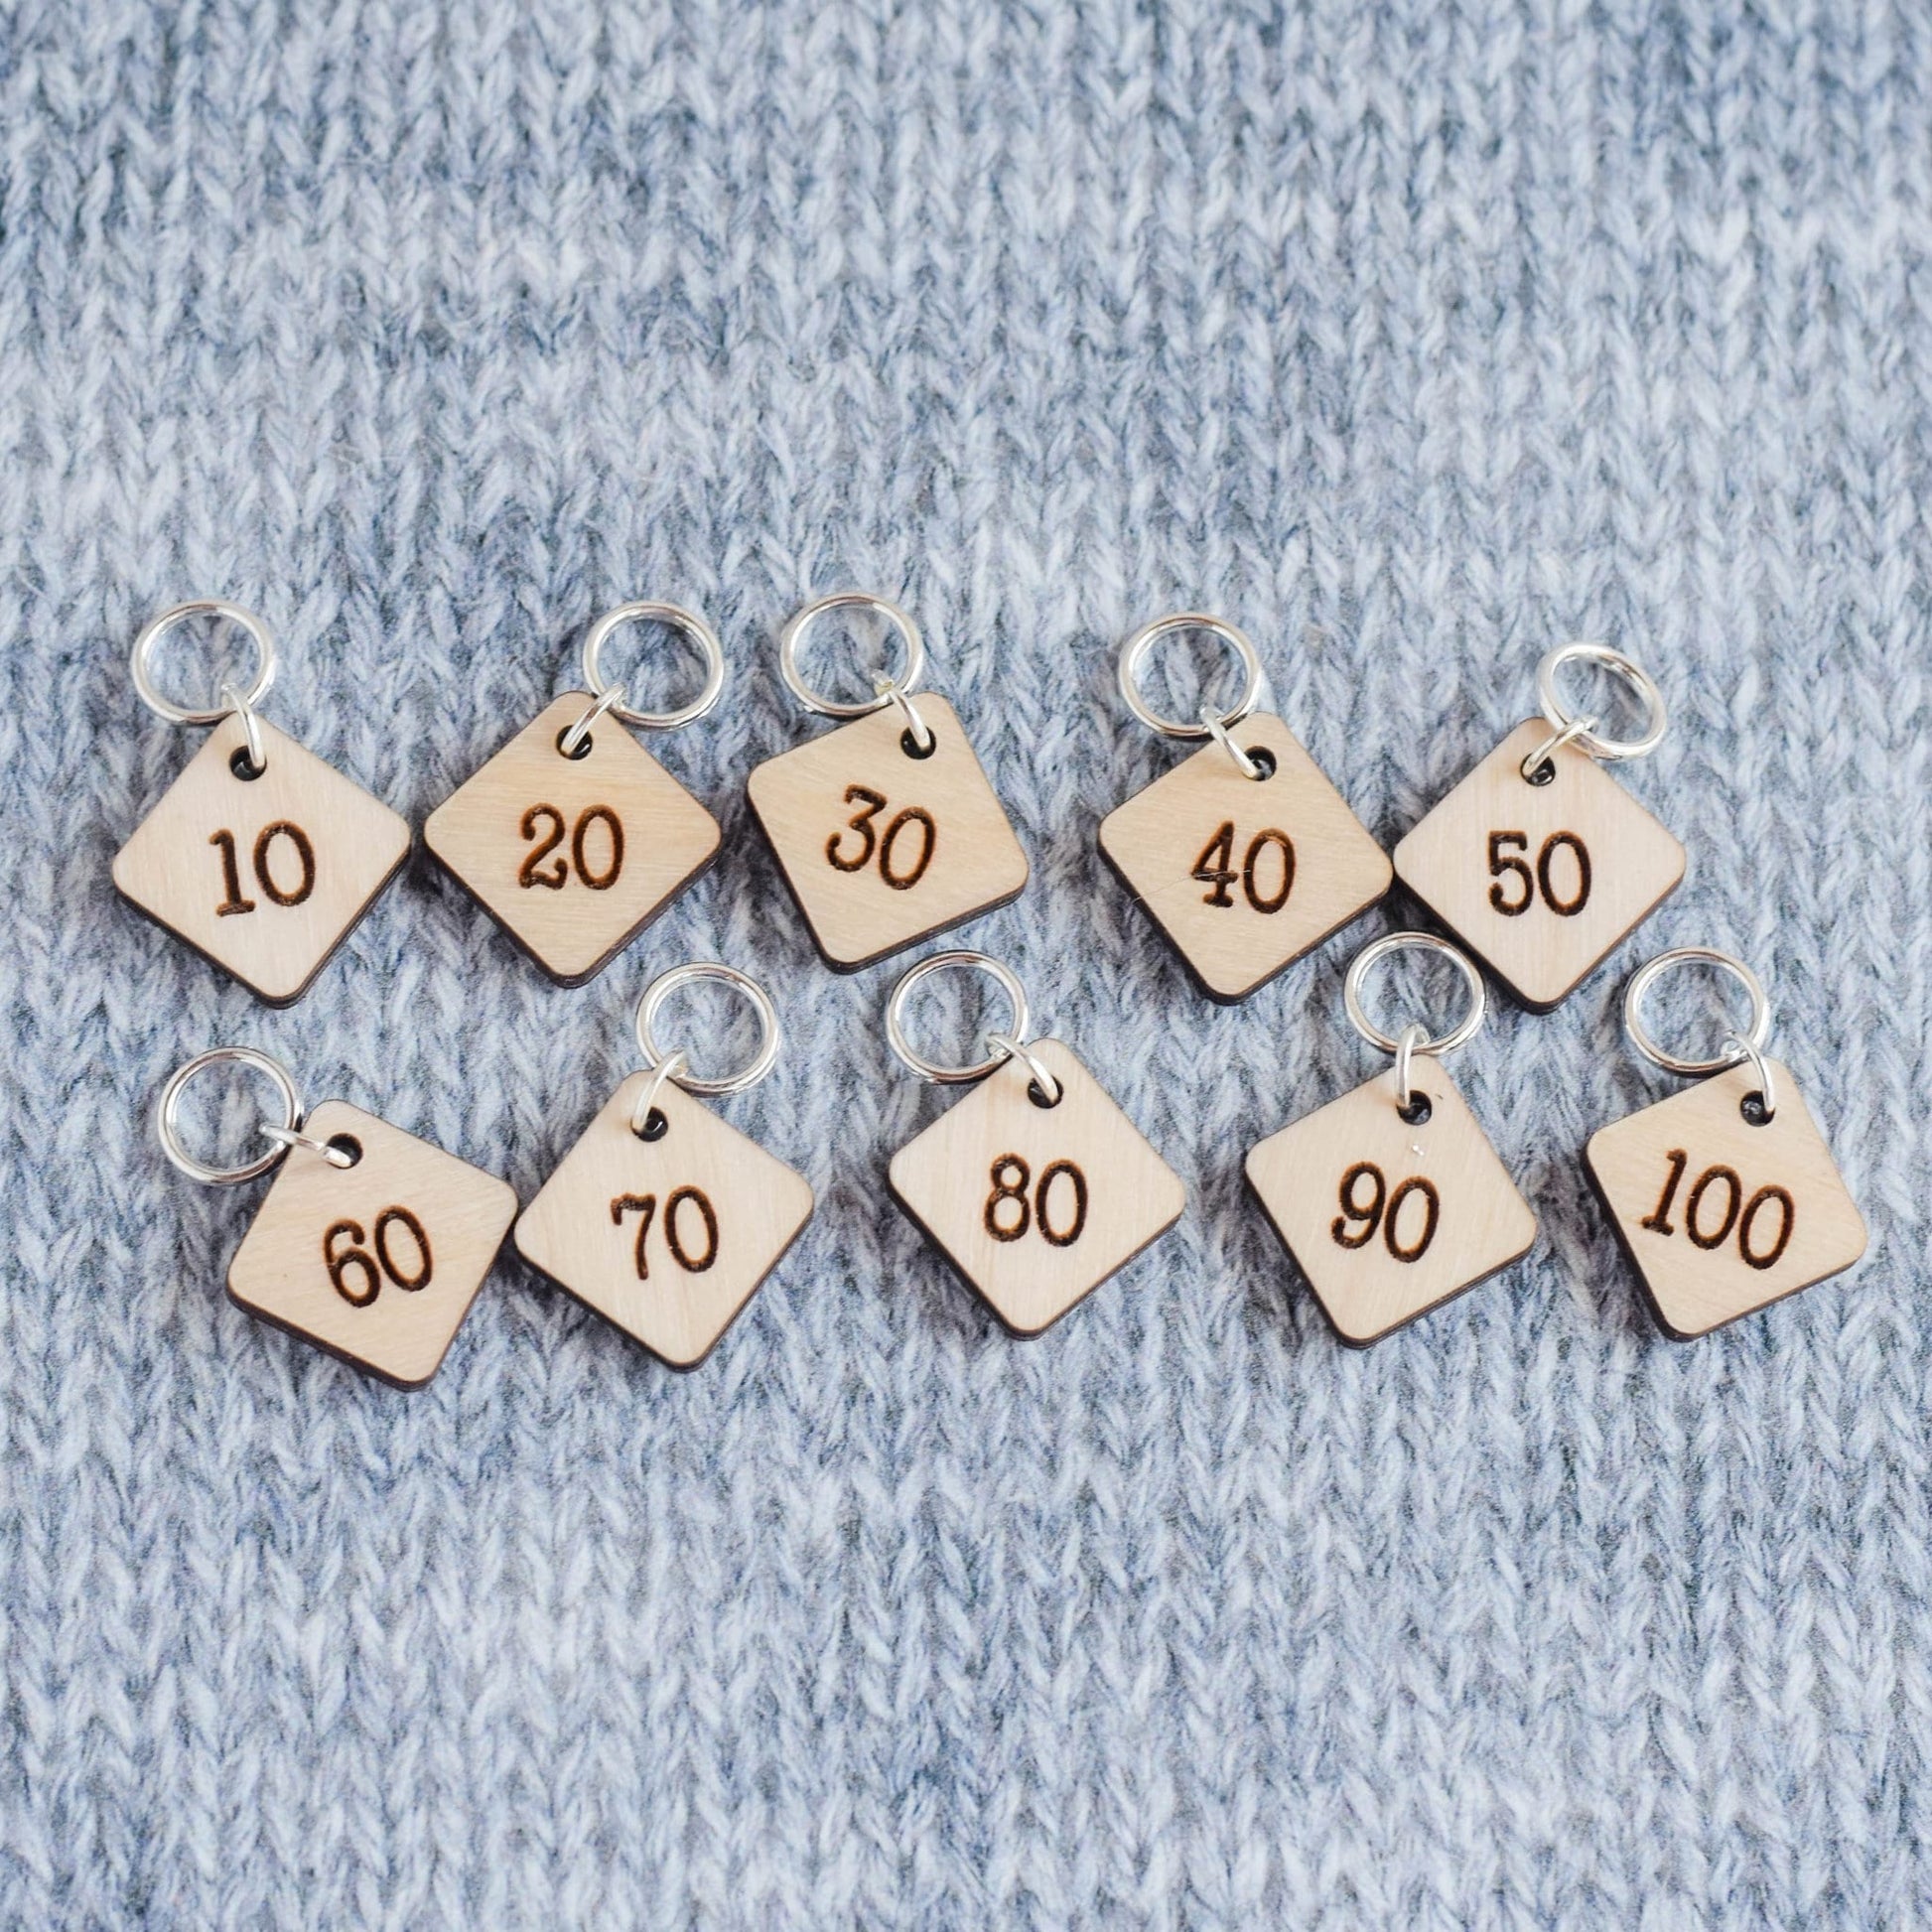 Set of 10 Stitch Markers - 10-100 - Cast On Counting Numbers, Laser Engraved Wood Stitch Markers, Counting Stitch Markers